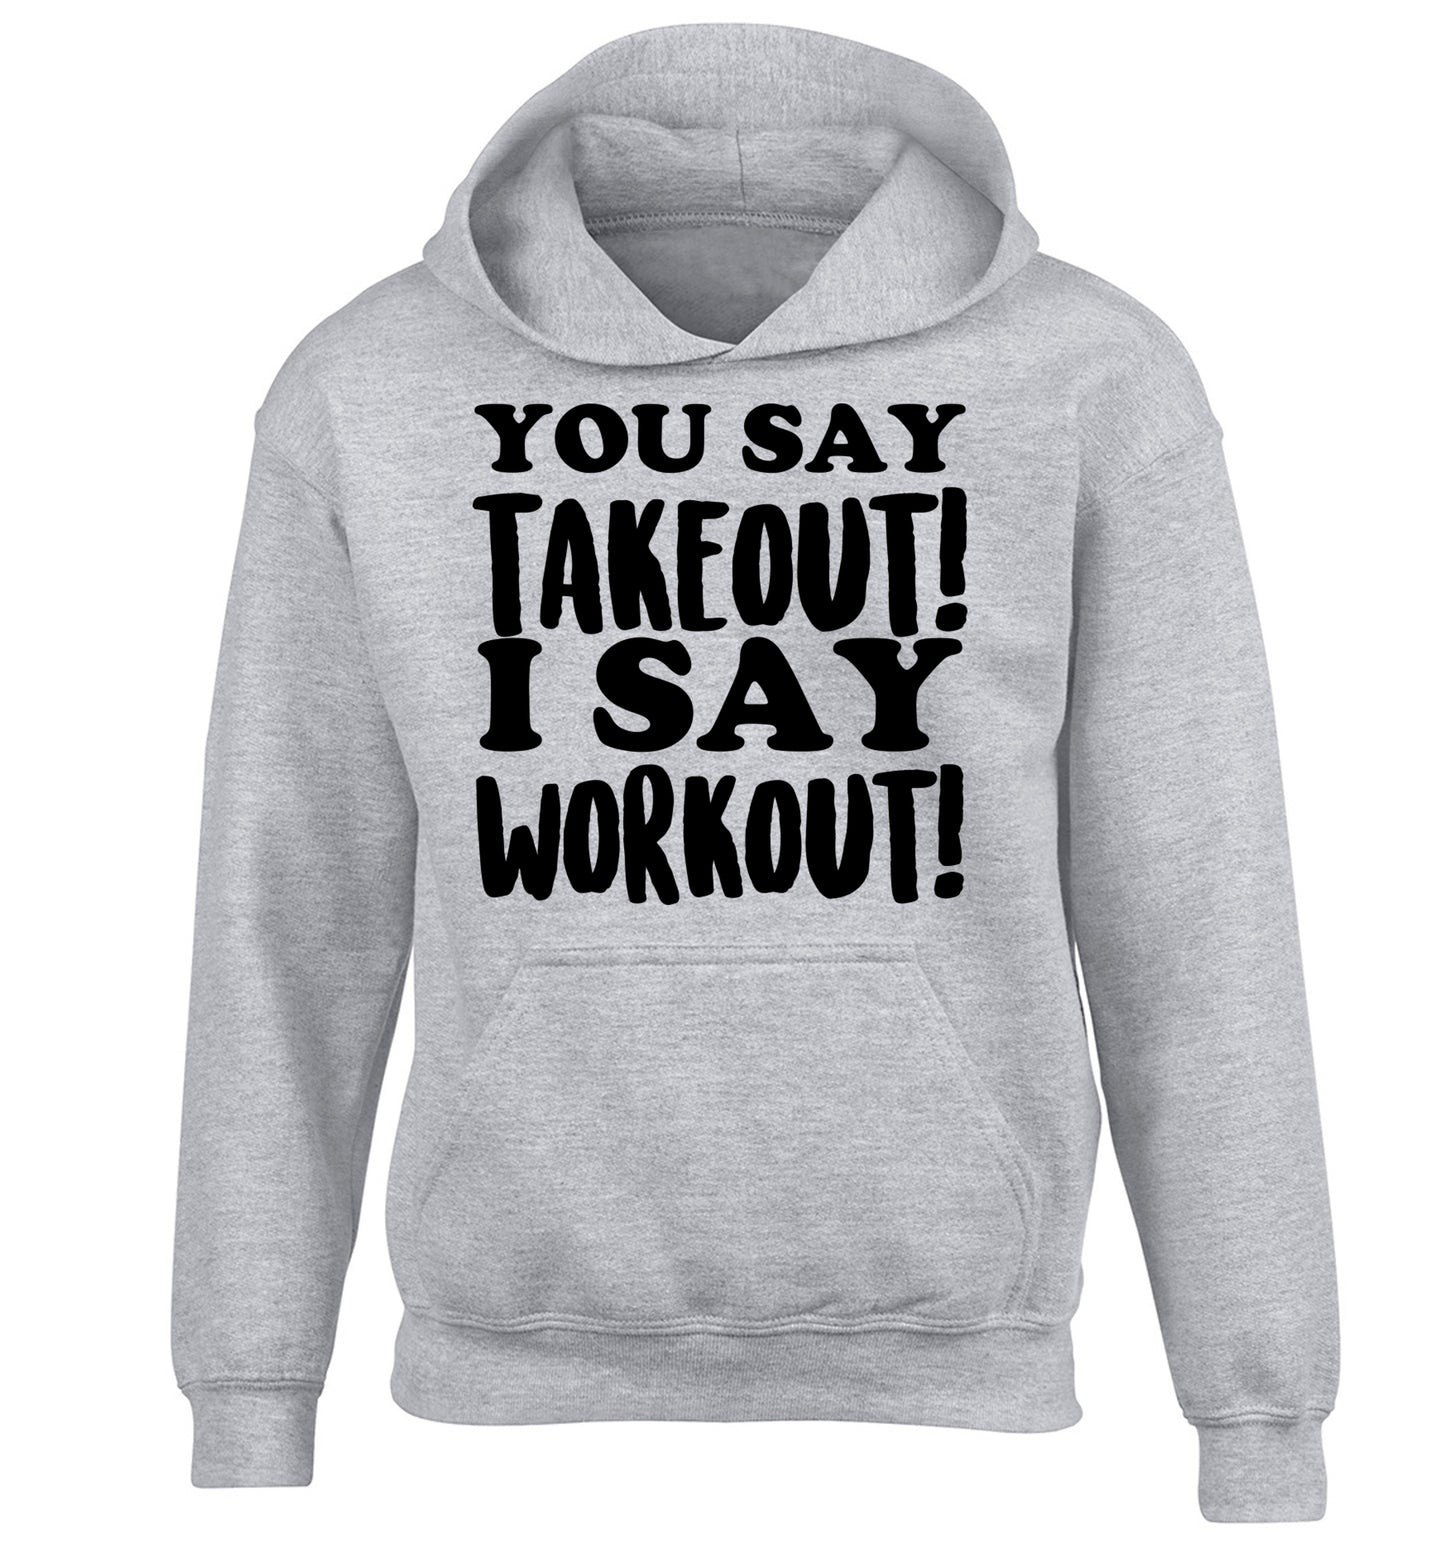 You say takeout I say workout! children's grey hoodie 12-14 Years